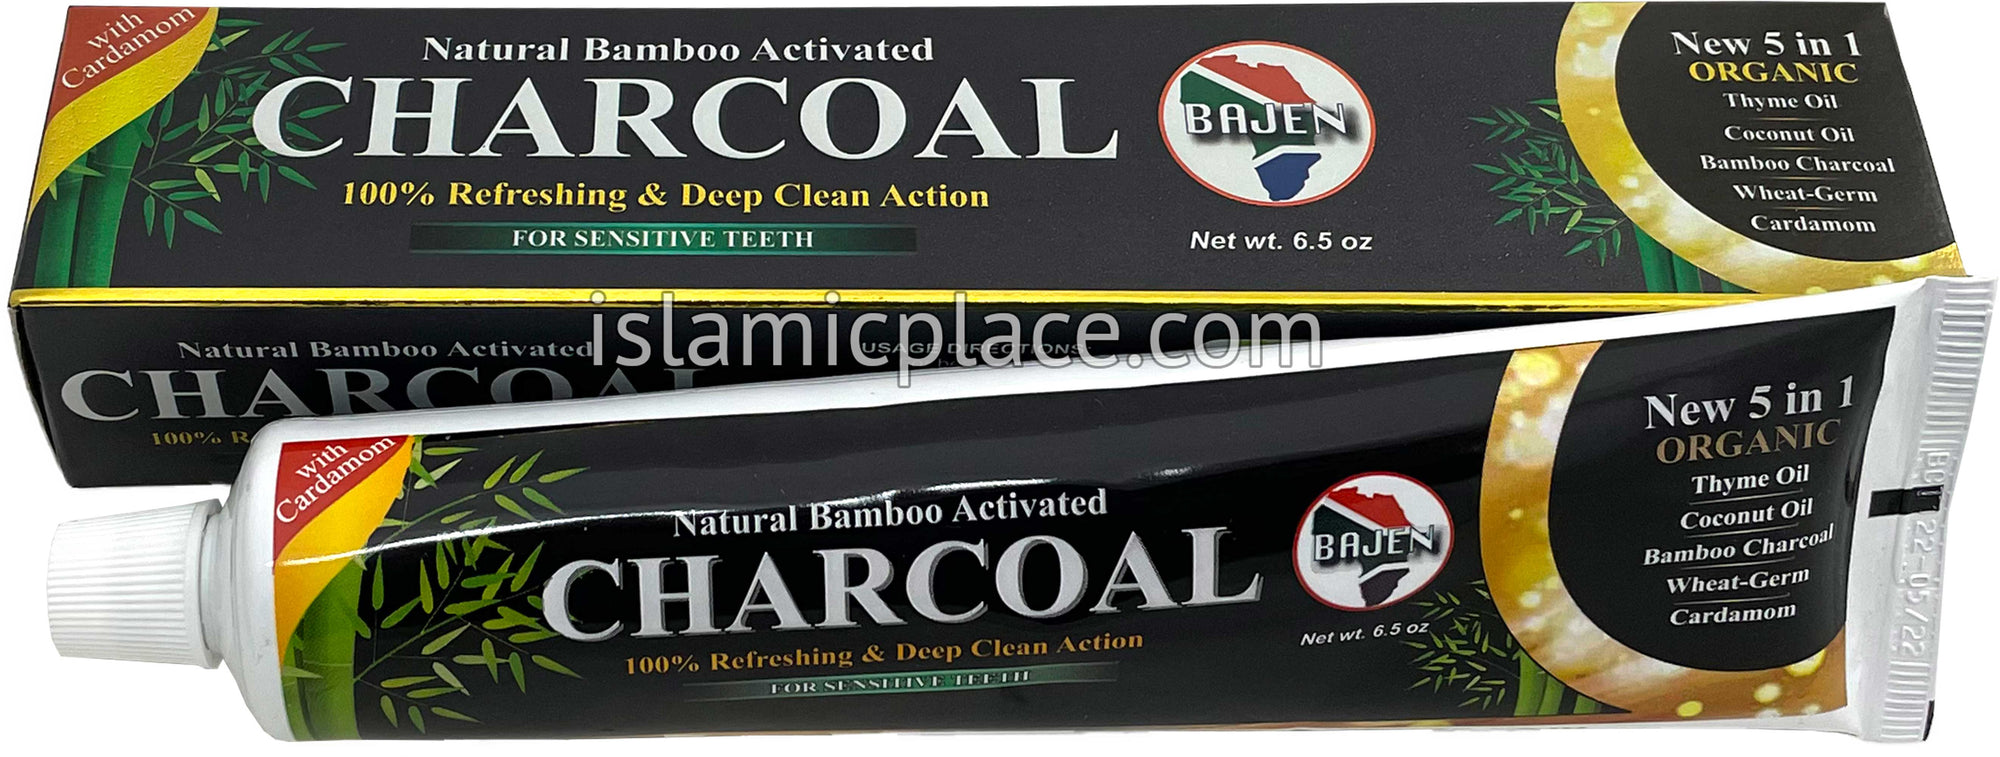 Charcoal Toothpaste - 5 in 1 (Thyme Oil, Coconut Oil, Bamboo Charcoal, Wheat Germ, Cardamom) 6.5 oz - Halal & Organic